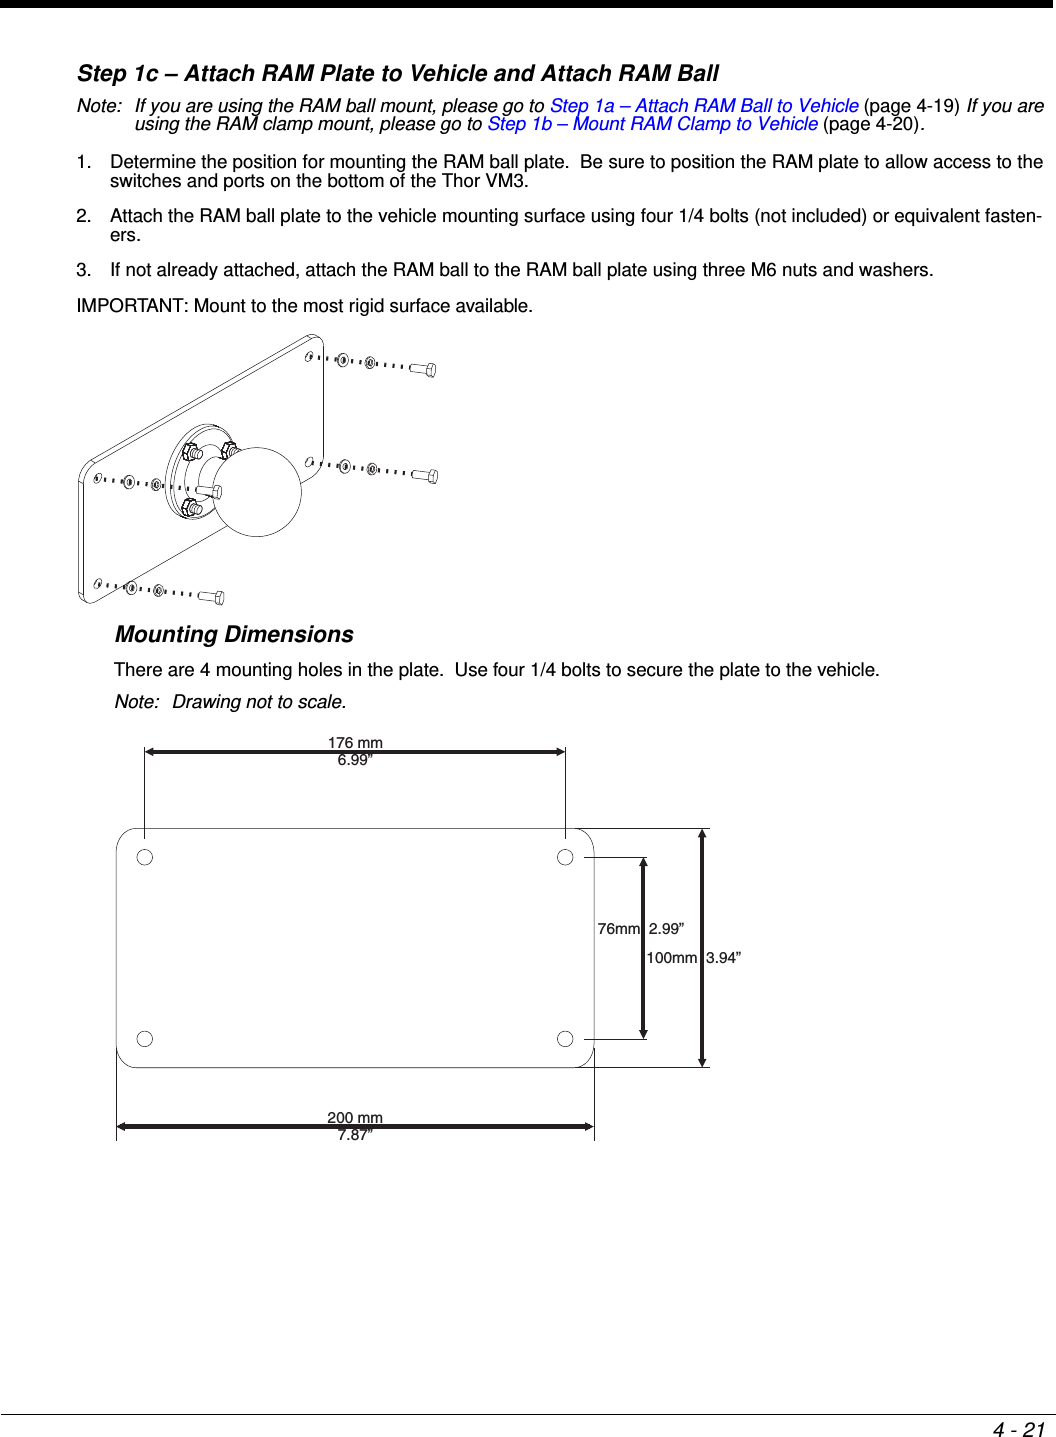 4 - 21Step 1c – Attach RAM Plate to Vehicle and Attach RAM BallNote: If you are using the RAM ball mount, please go to Step 1a – Attach RAM Ball to Vehicle (page 4-19) If you are using the RAM clamp mount, please go to Step 1b – Mount RAM Clamp to Vehicle (page 4-20).1. Determine the position for mounting the RAM ball plate.  Be sure to position the RAM plate to allow access to the switches and ports on the bottom of the Thor VM3.2. Attach the RAM ball plate to the vehicle mounting surface using four 1/4 bolts (not included) or equivalent fasten-ers.3. If not already attached, attach the RAM ball to the RAM ball plate using three M6 nuts and washers.IMPORTANT: Mount to the most rigid surface available.Mounting DimensionsThere are 4 mounting holes in the plate.  Use four 1/4 bolts to secure the plate to the vehicle.Note: Drawing not to scale.176 mm6.99”200 mm7.87”76mm 2.99”100mm 3.94”